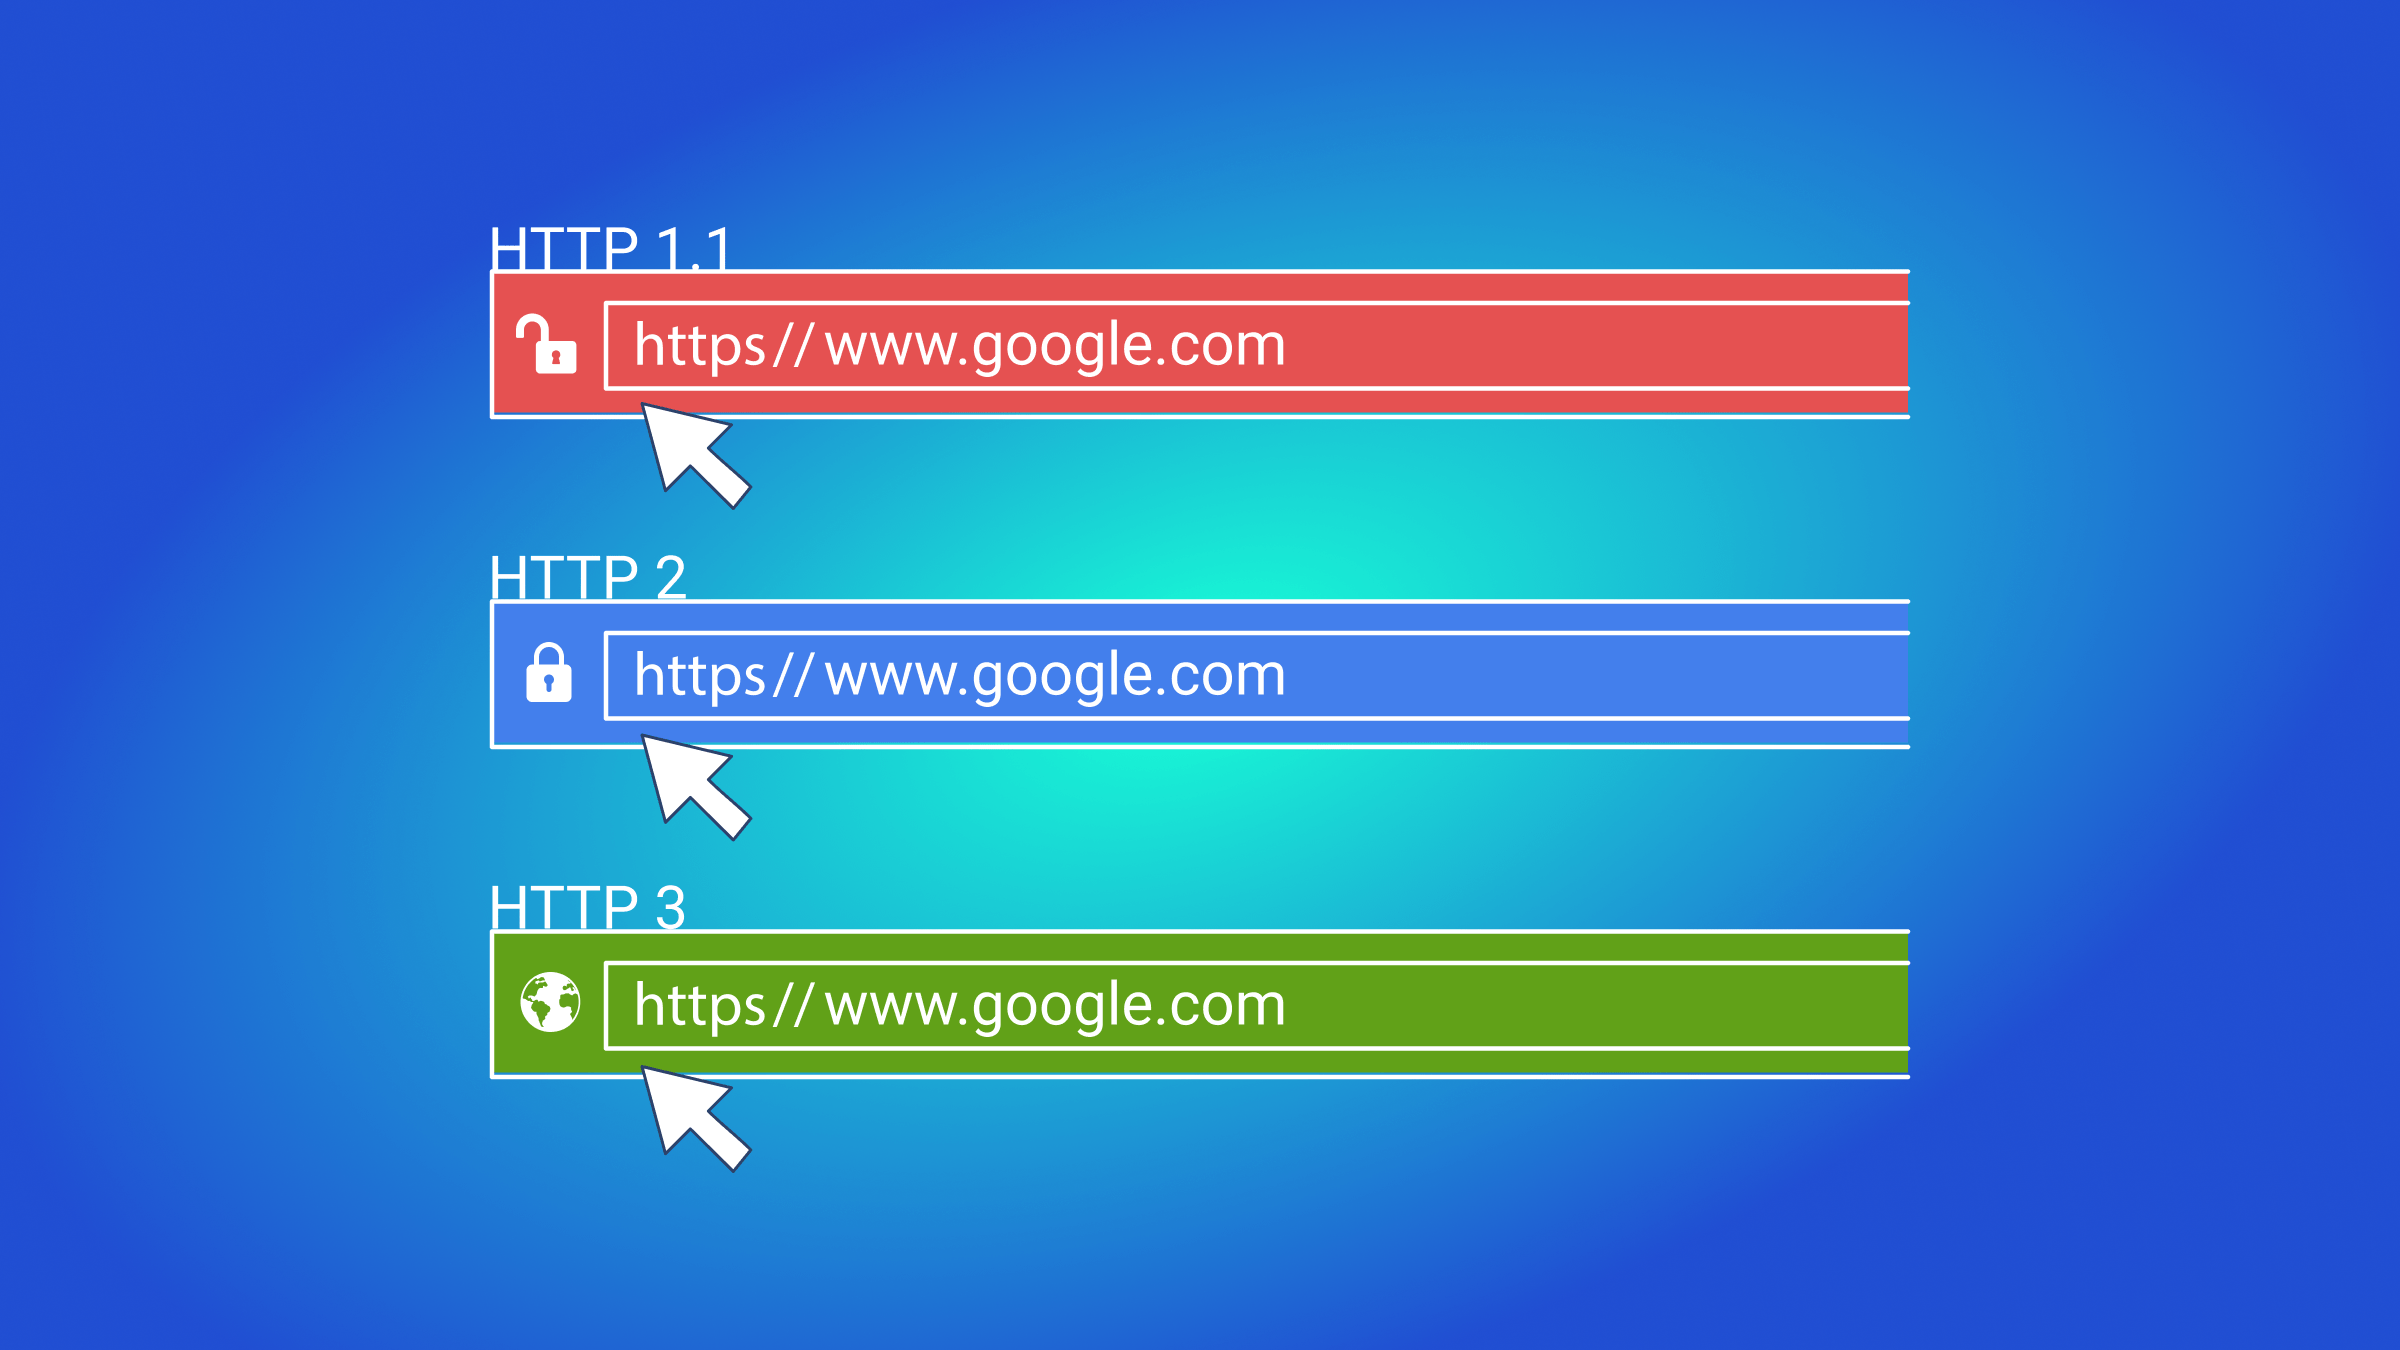 Battle of the HTTP Protocols!